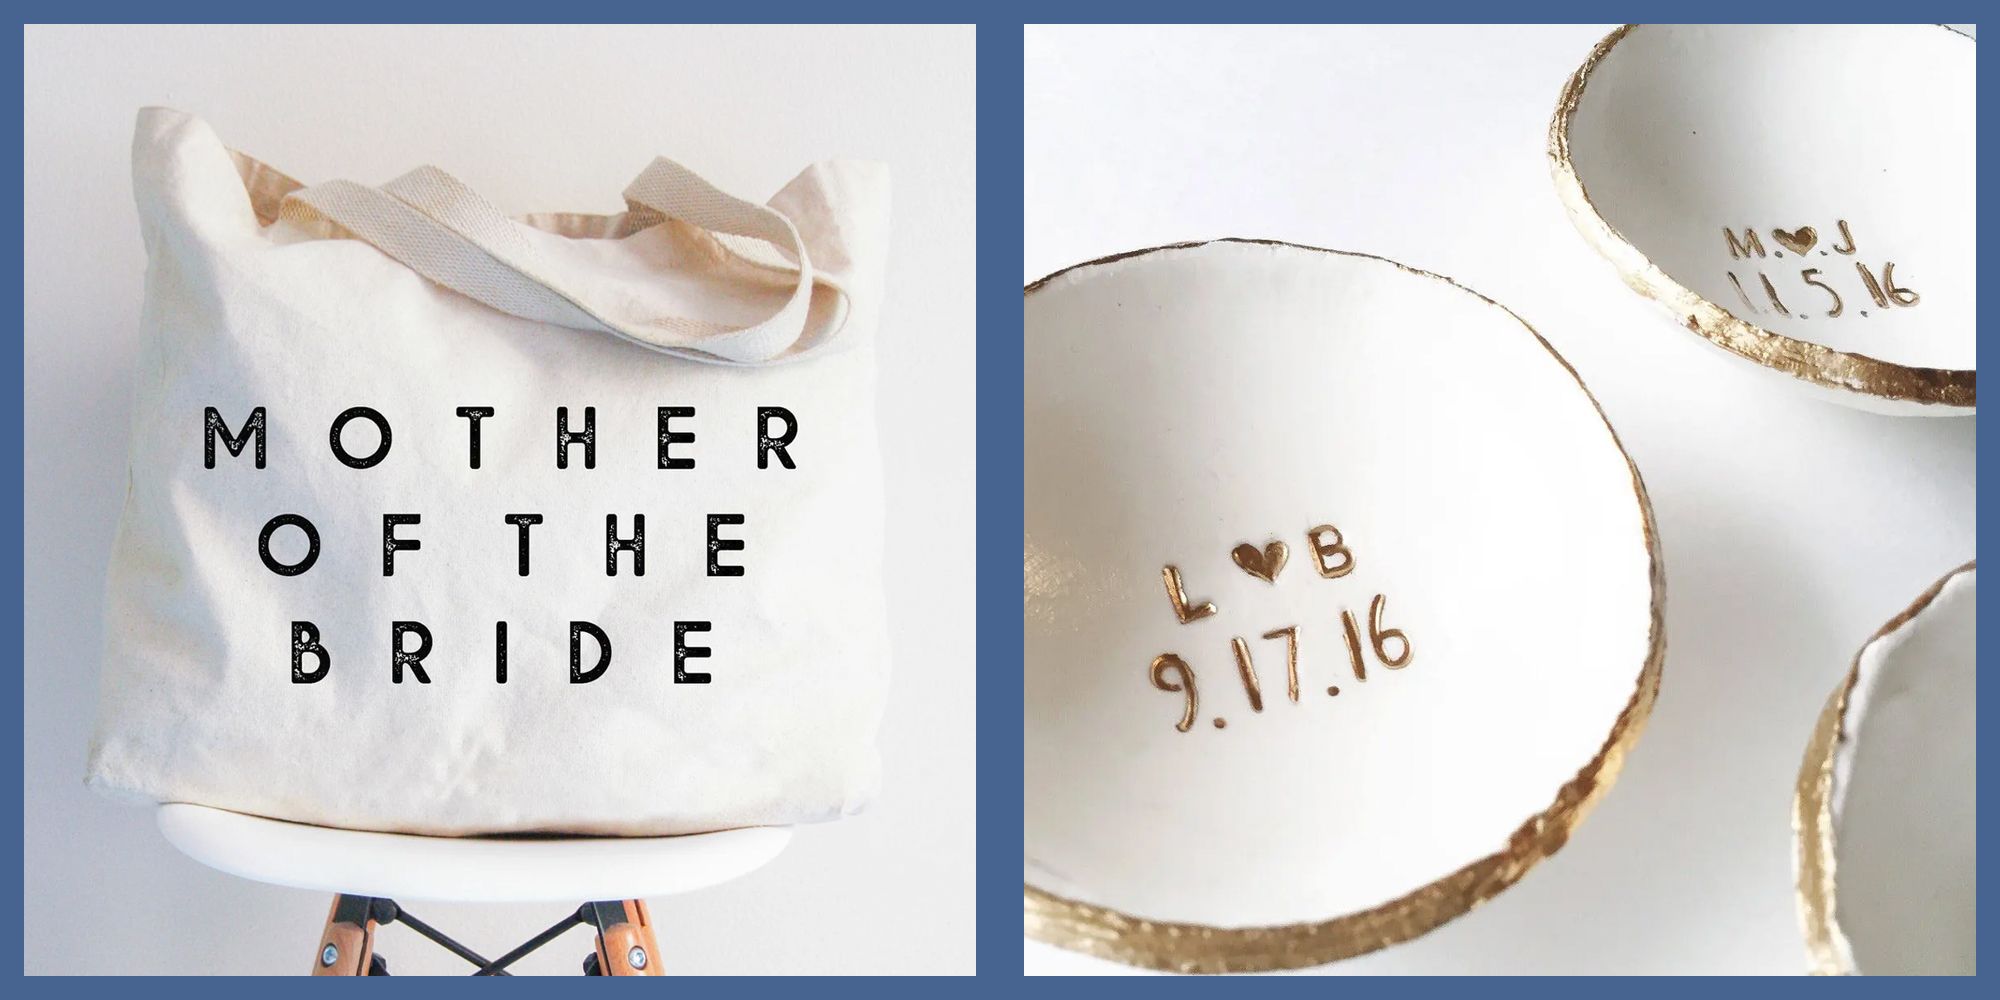 40 Best Wedding Gifts For Newlyweds - Top Wedding Gift Ideas